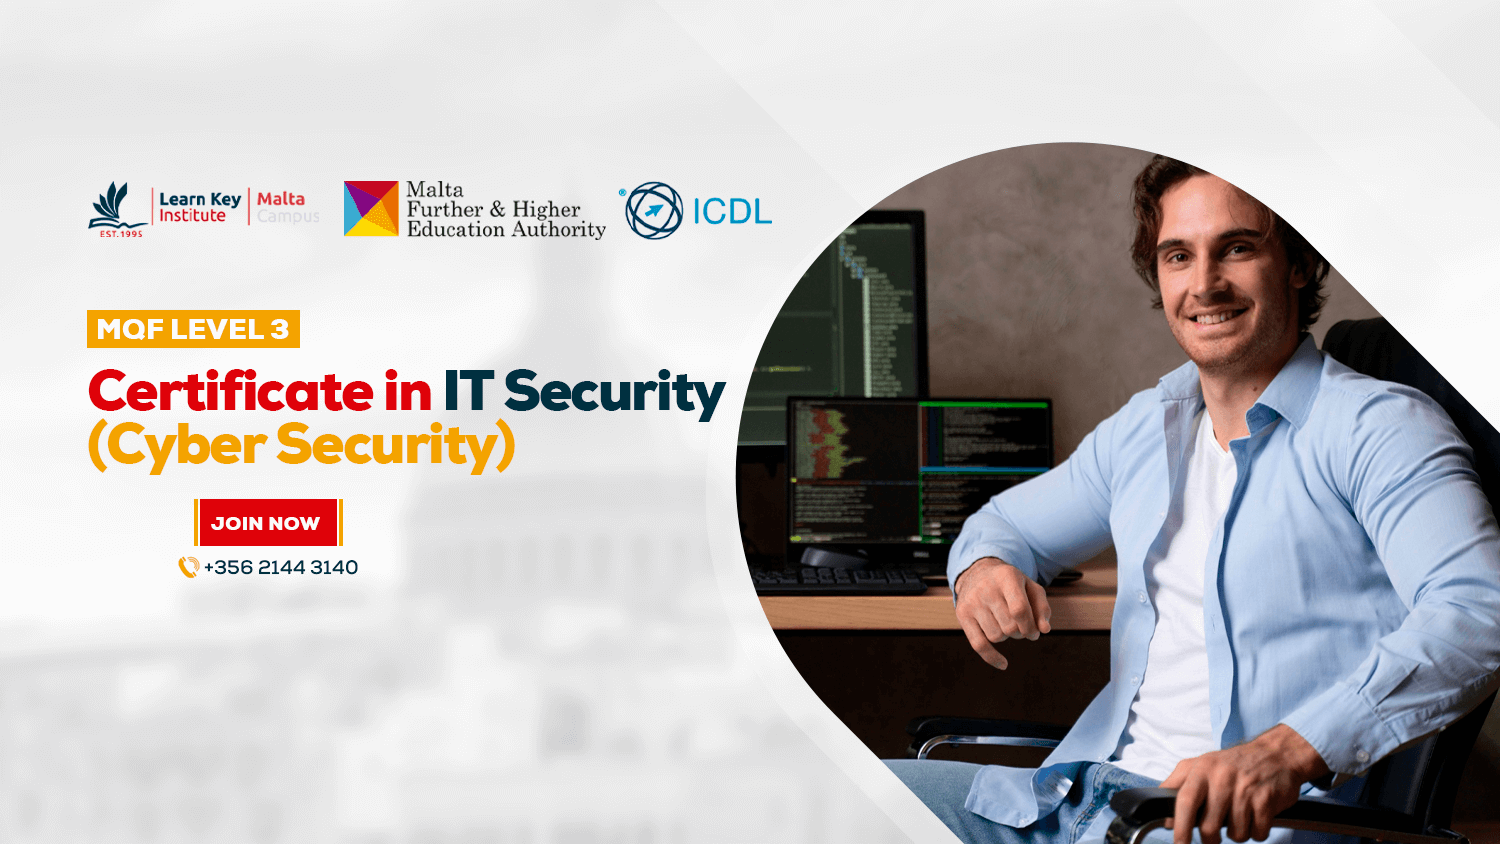 MQF/EQF Level 3 Certificate in IT Security (Cyber Security)